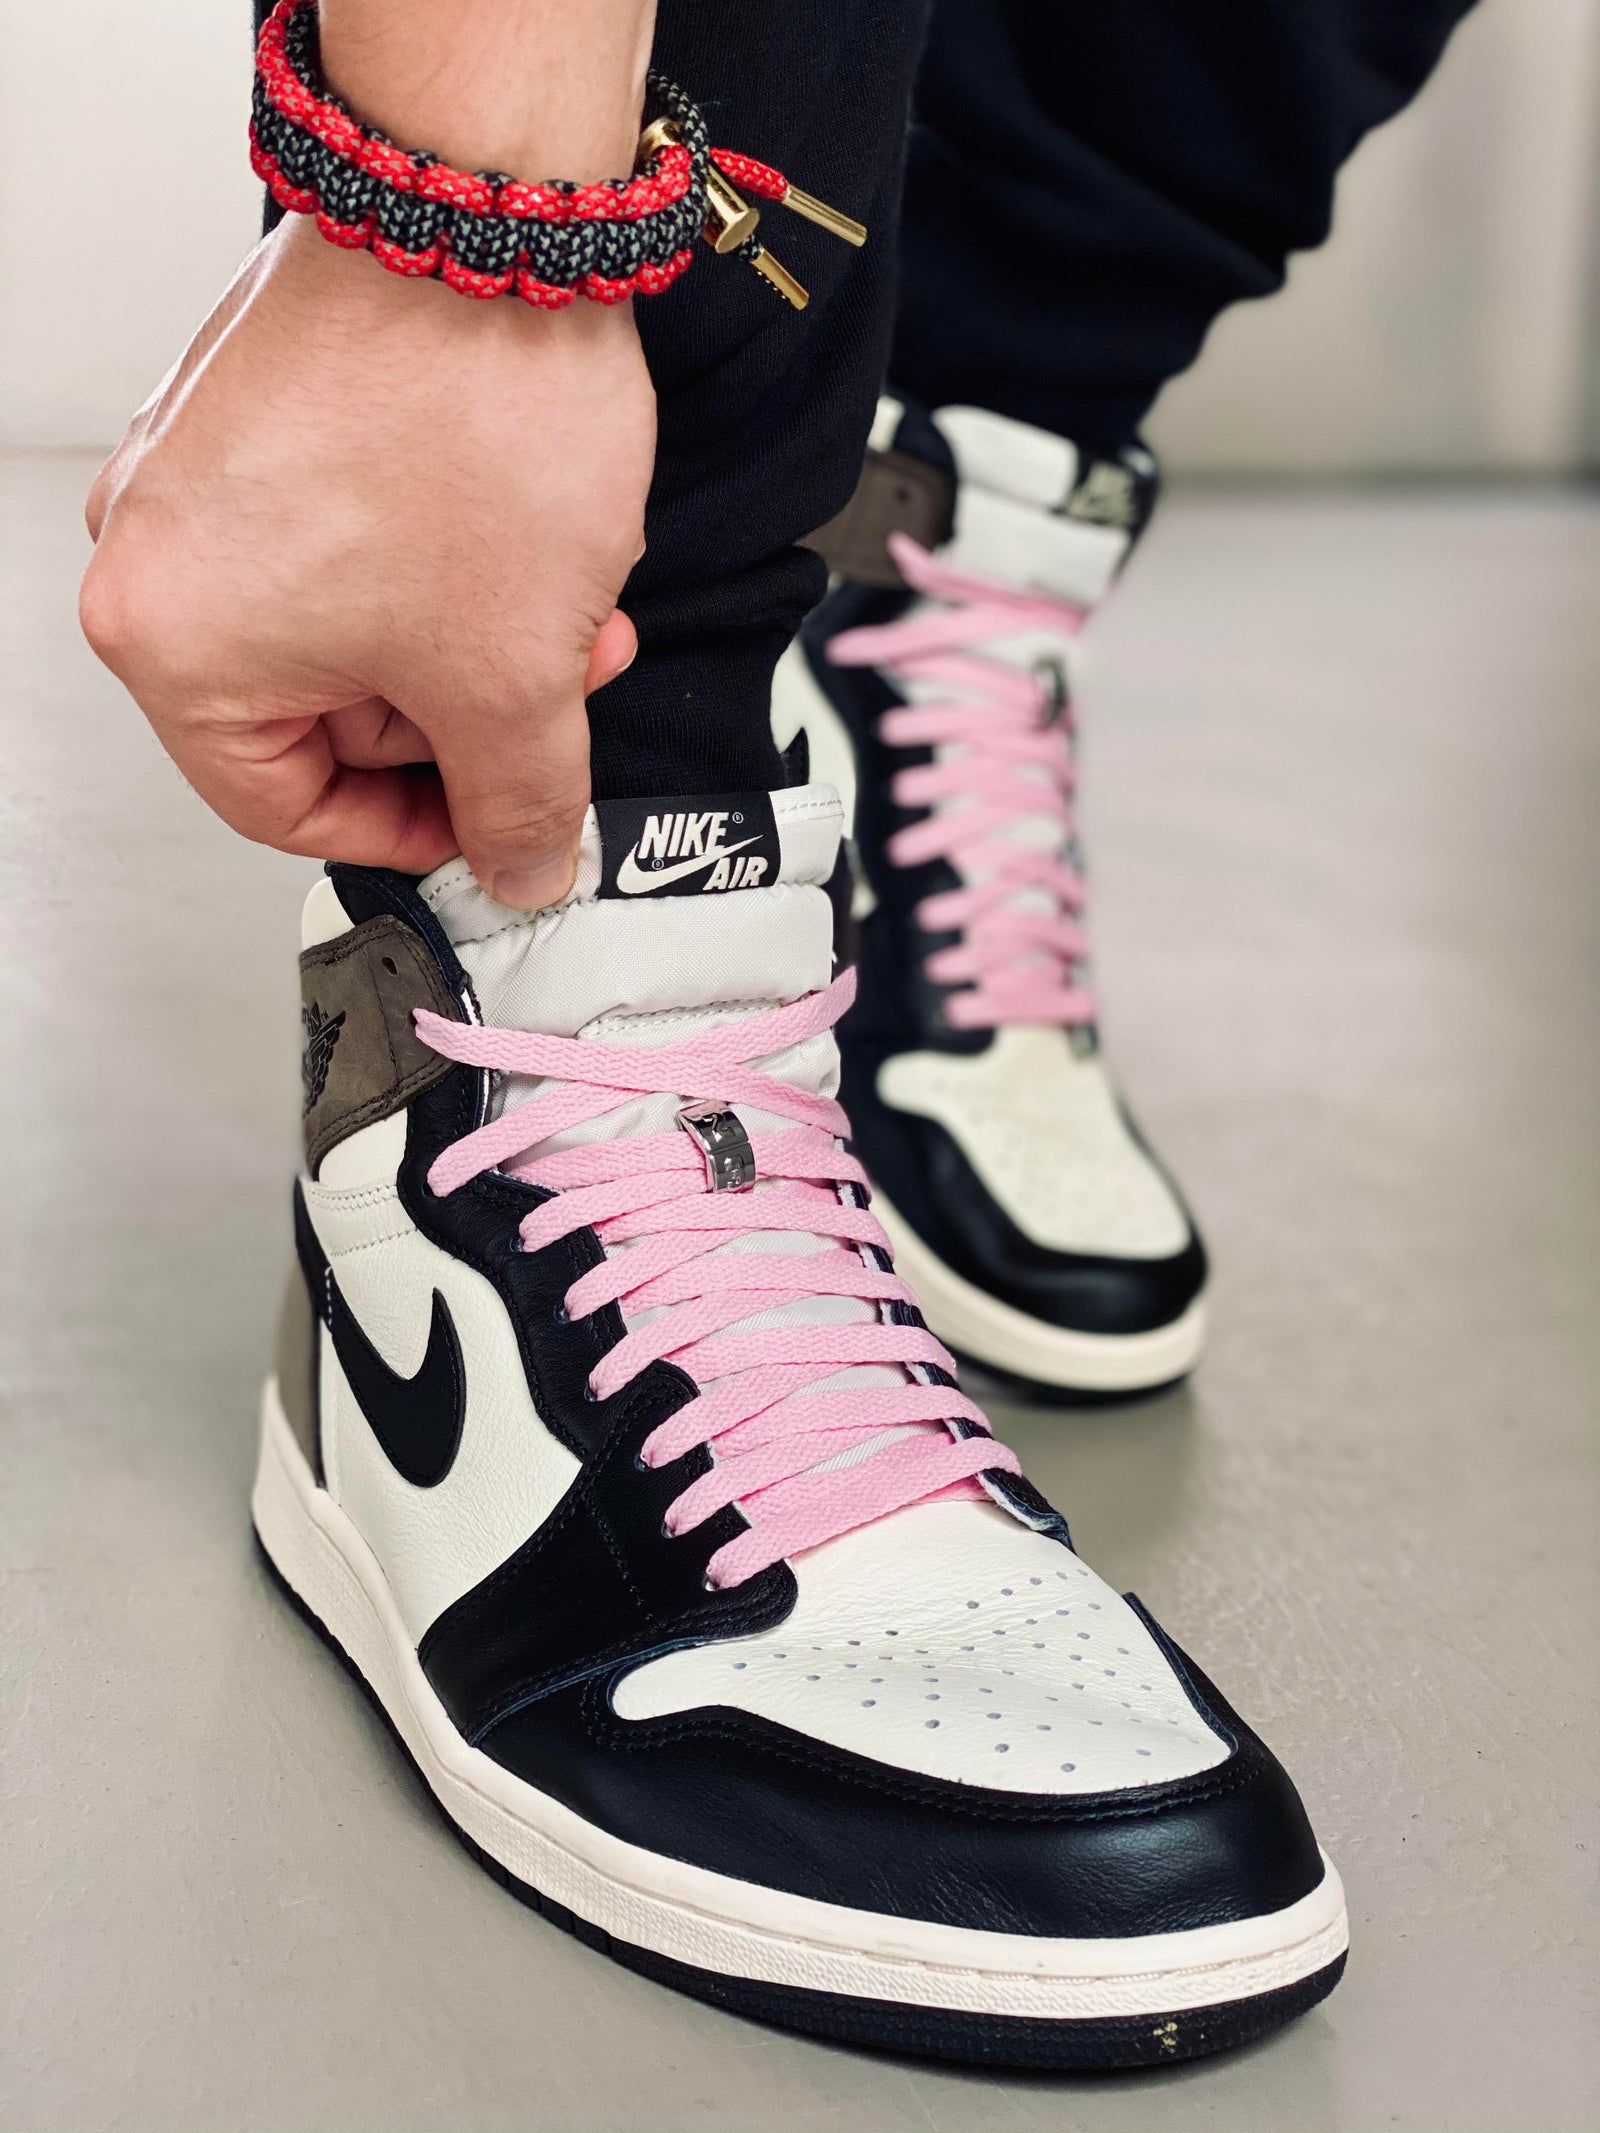 Travis Scott Pink Laces : Where to buy them? | By Slickieslaces